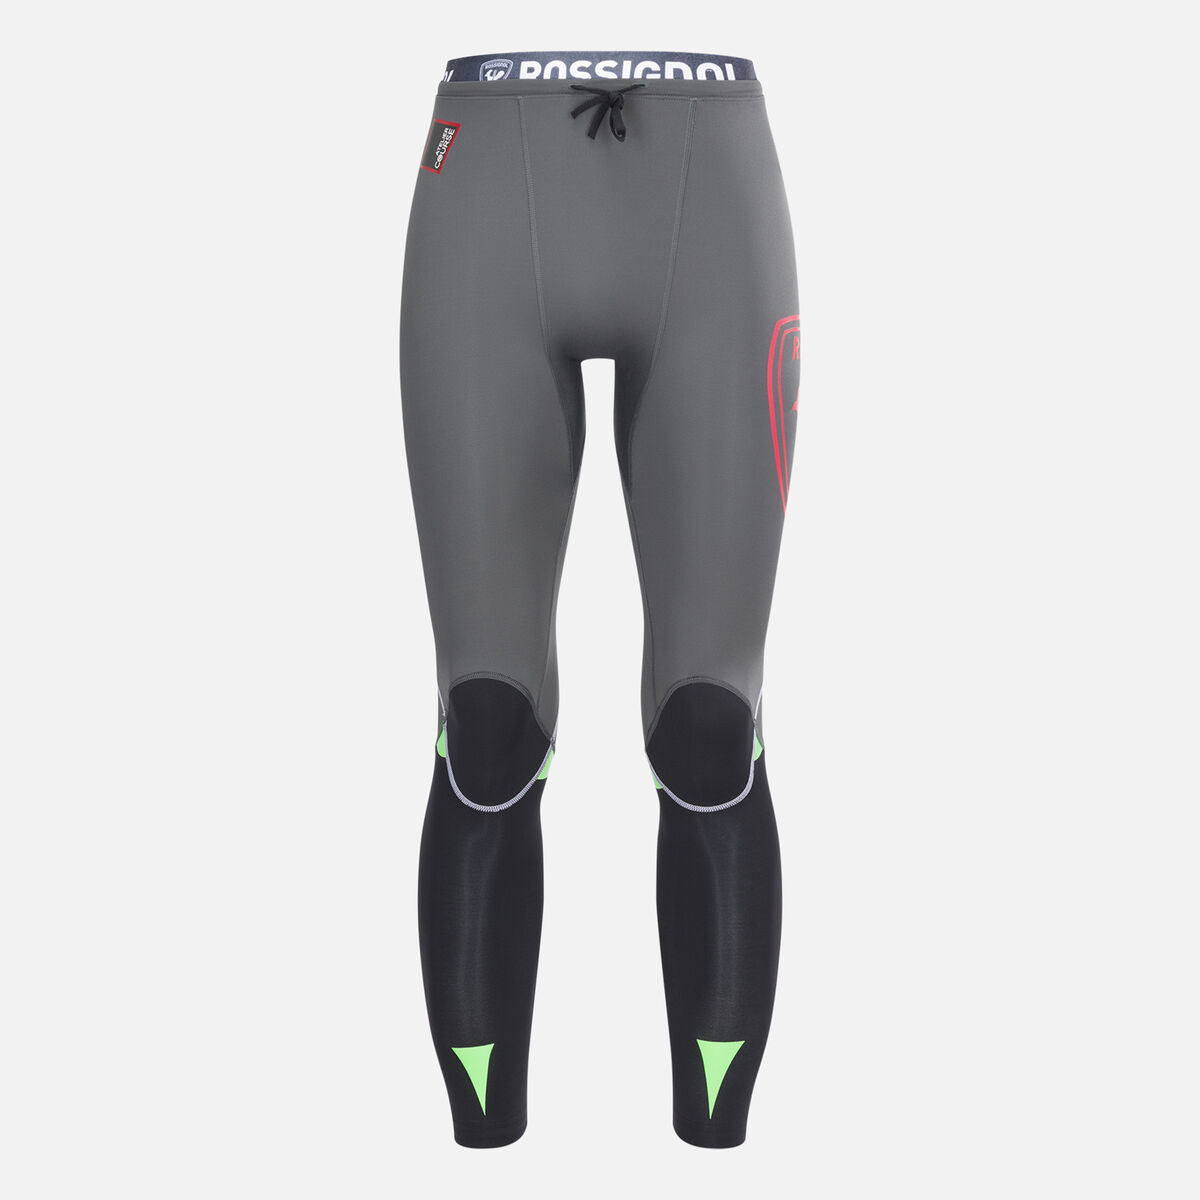 SKINS Launch Latest Range of Compression Gear – The DNAmic Range!